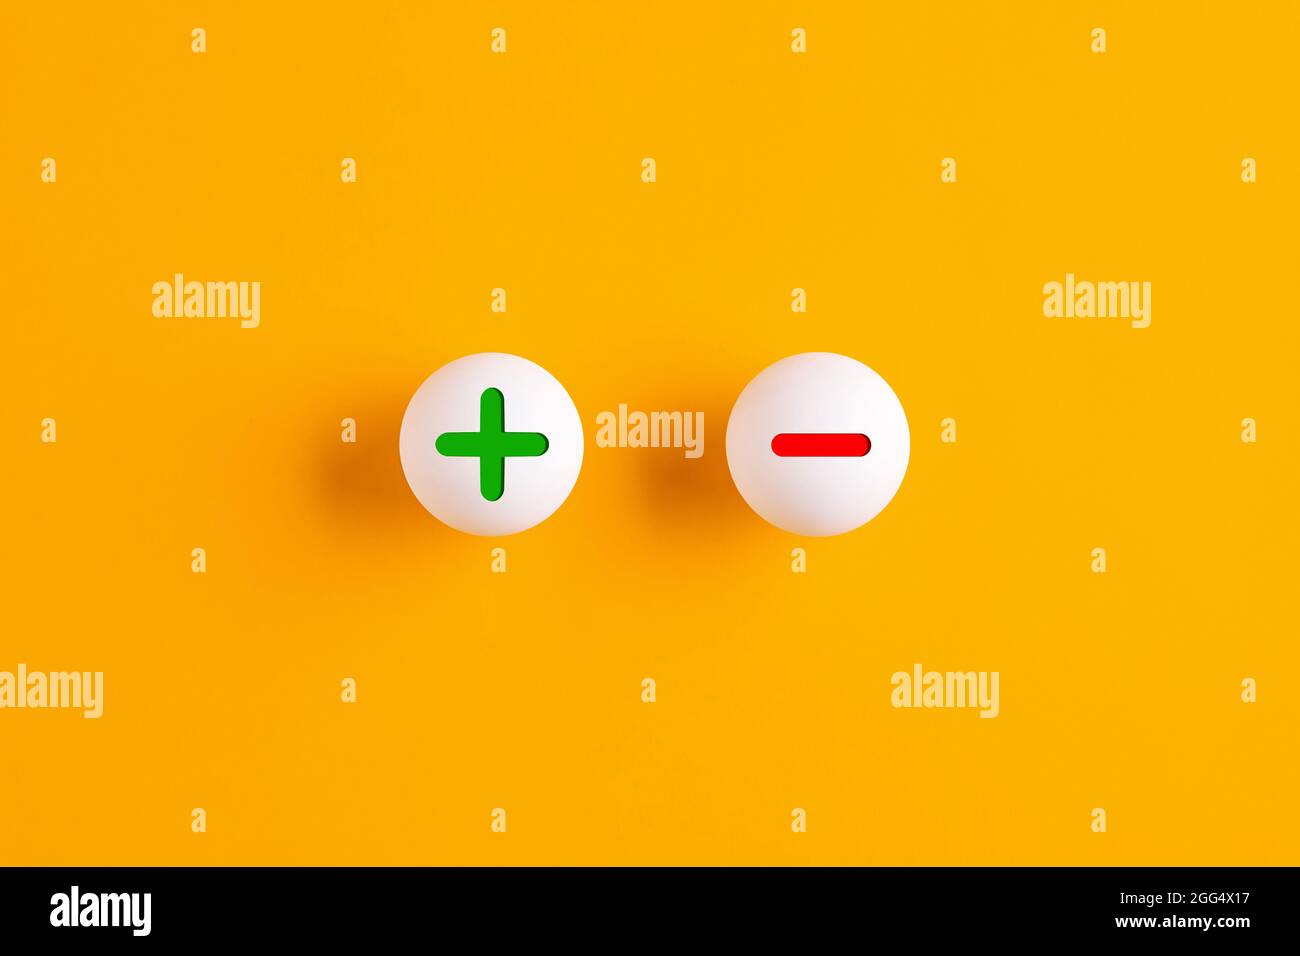 Plus and minus signs on table tennis balls on yellow background. Stock Photo